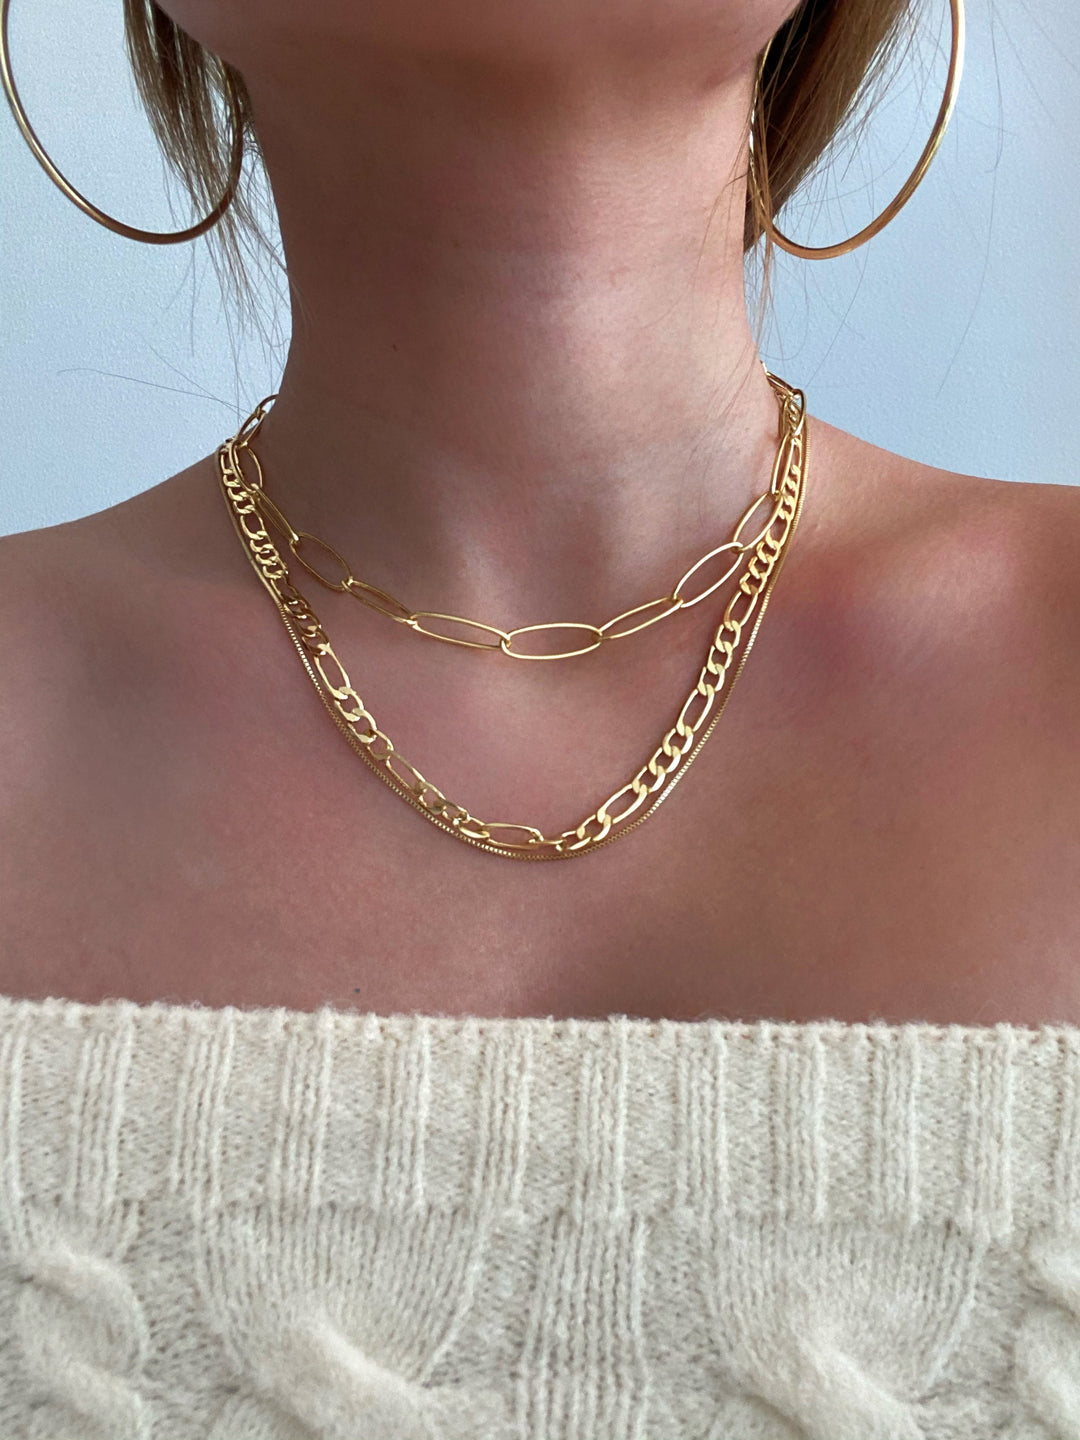 Chunky Figaro Chain Necklace - Gold Filled